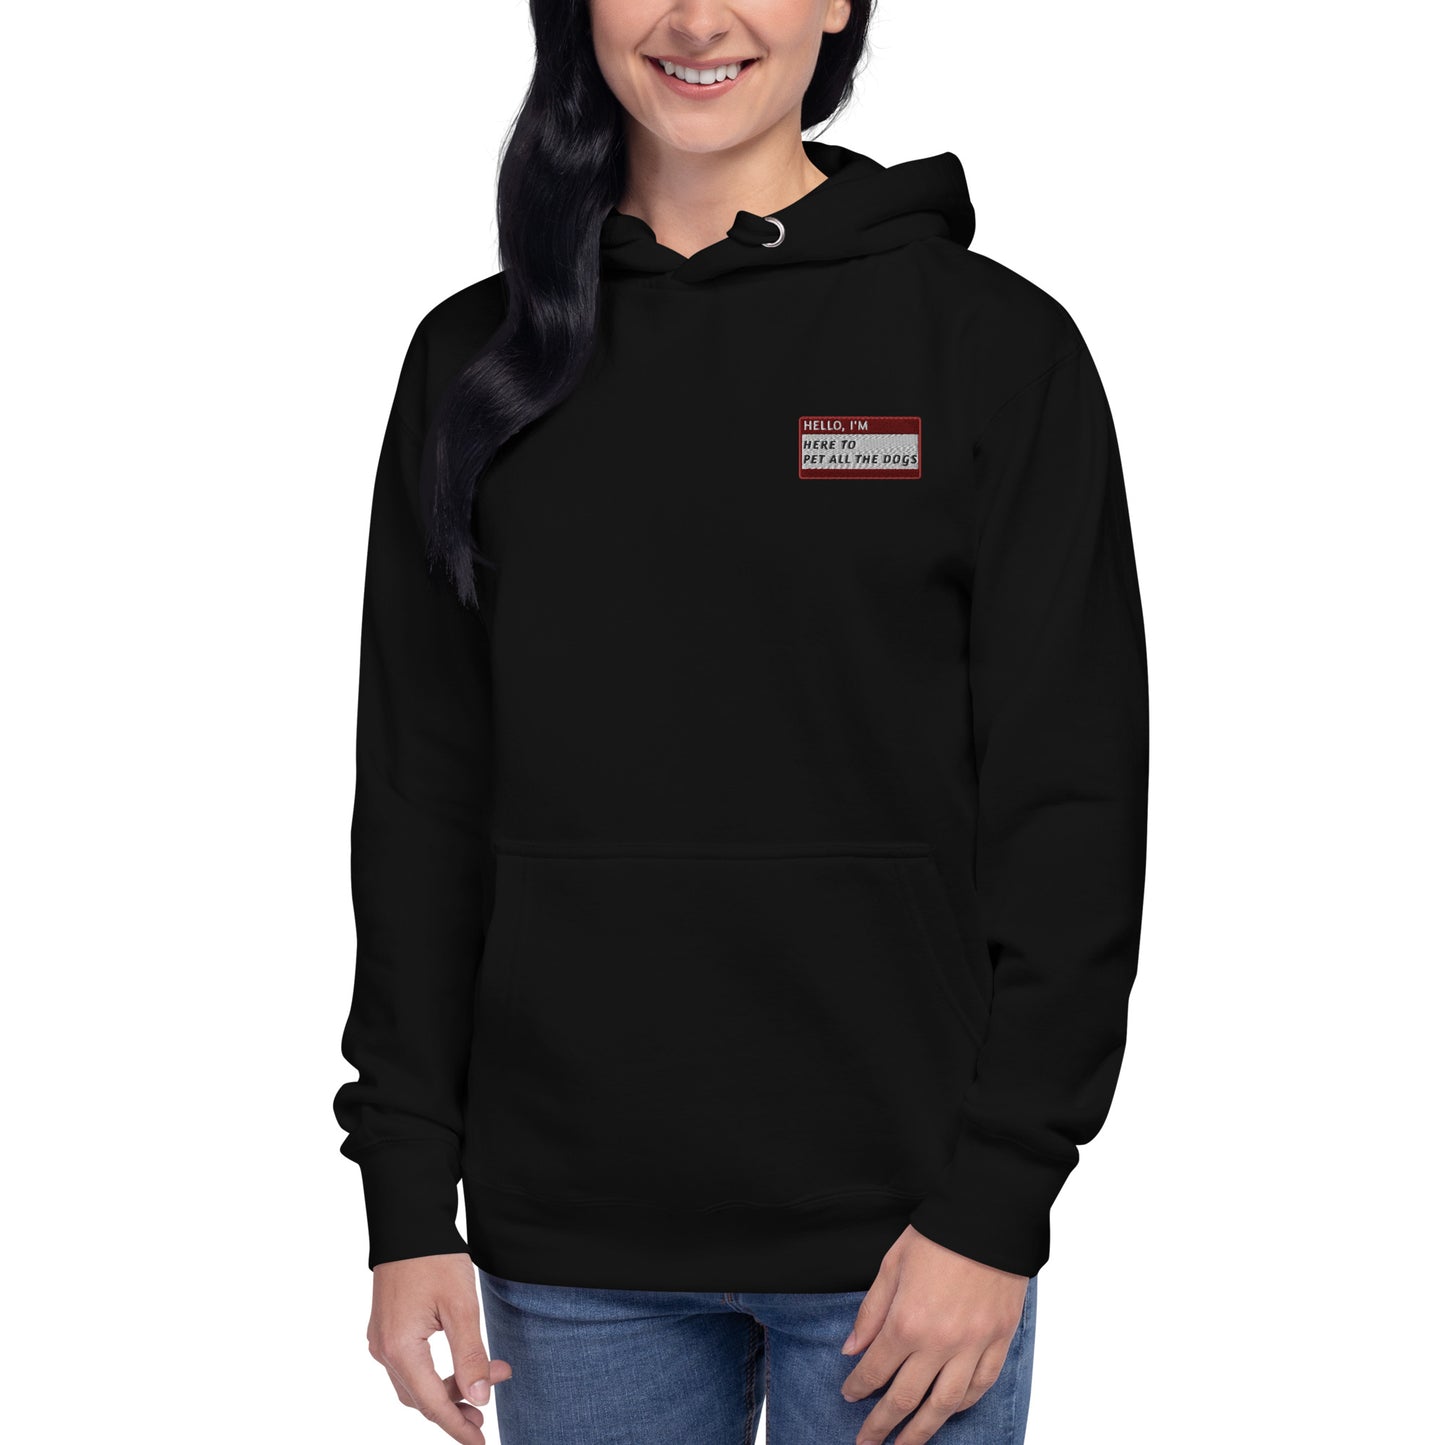 HELLO I'M HERE TO PET ALL THE DOGS - Name Tag Hoodie